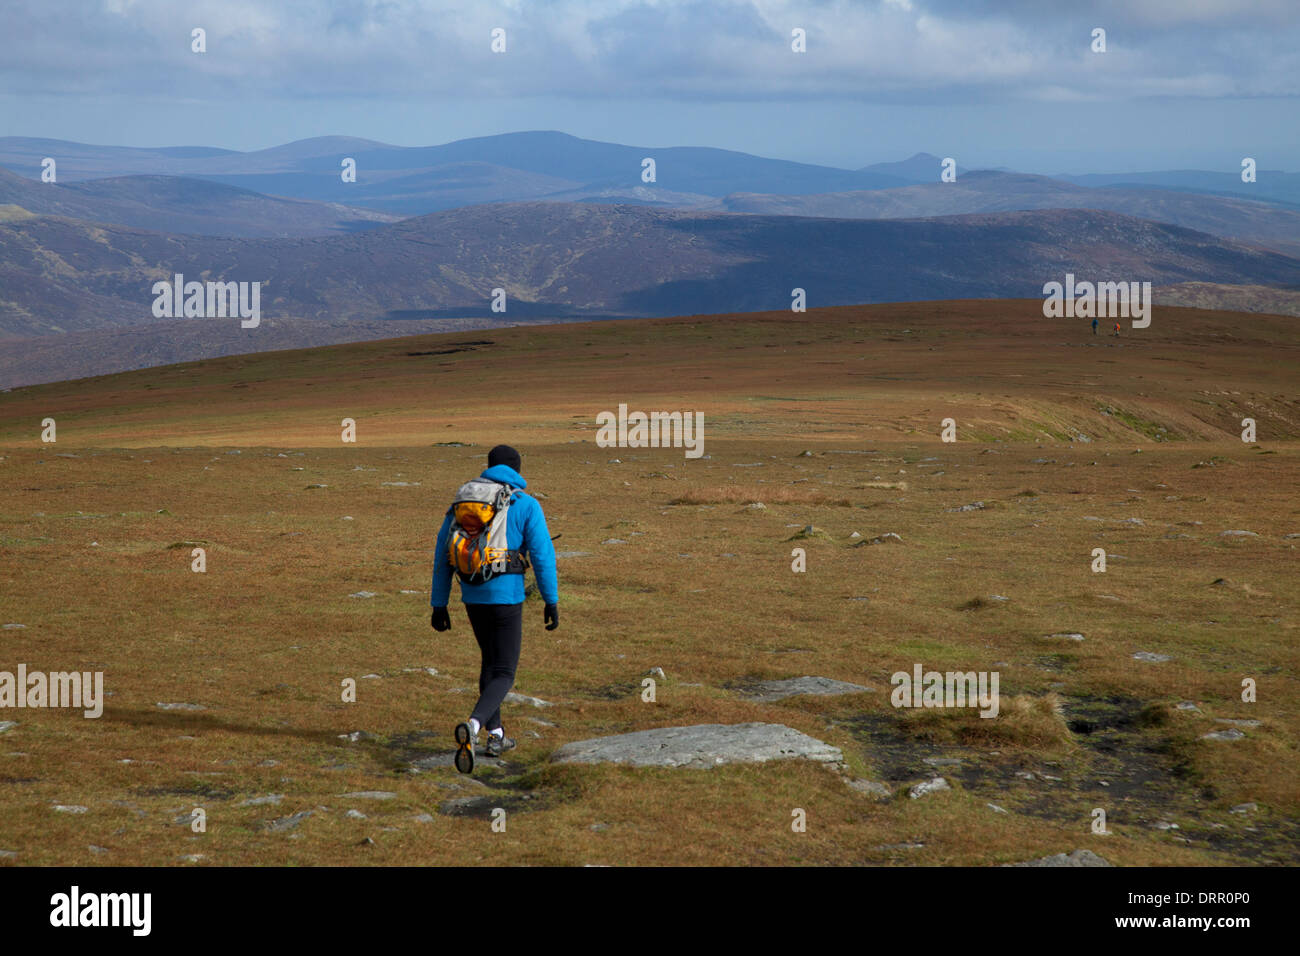 Mountain walker descending towards Cloghernagh from Lugnaquilla, Wicklow Mountains, County Wicklow, Ireland. Stock Photo